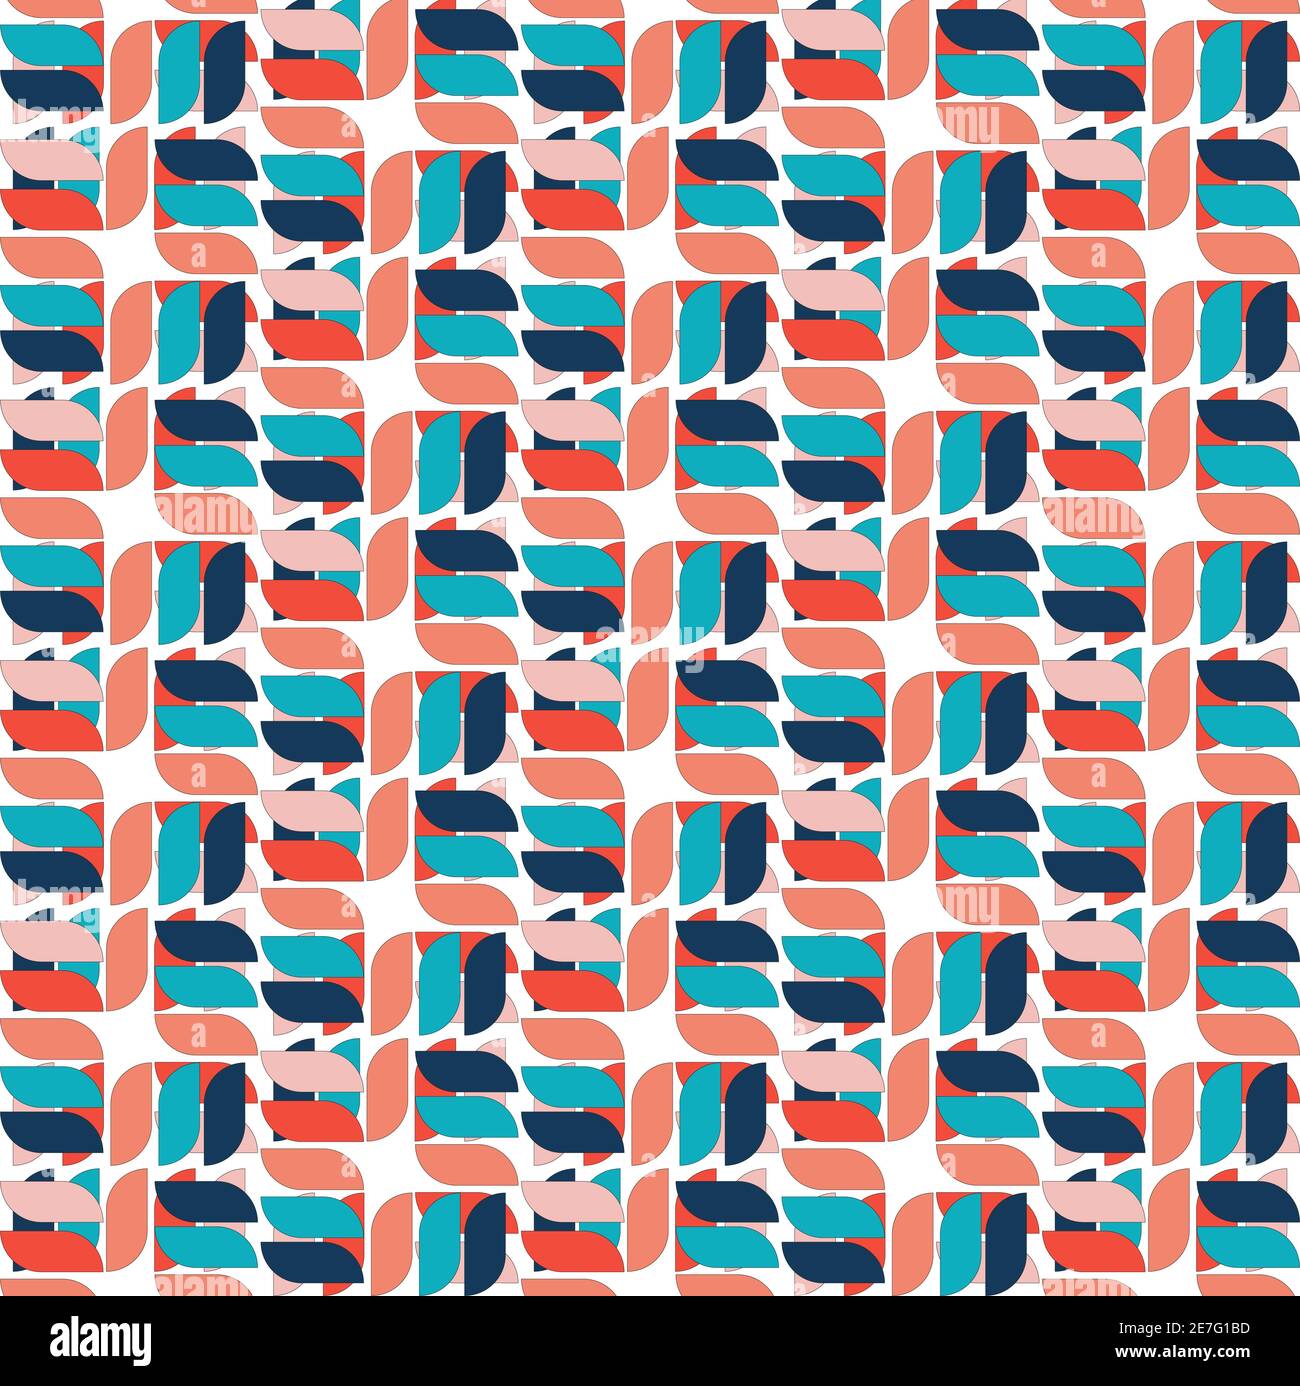 Modern seamless pattern in a colorful style - abstract graphic background from rounded shapes Stock Vector